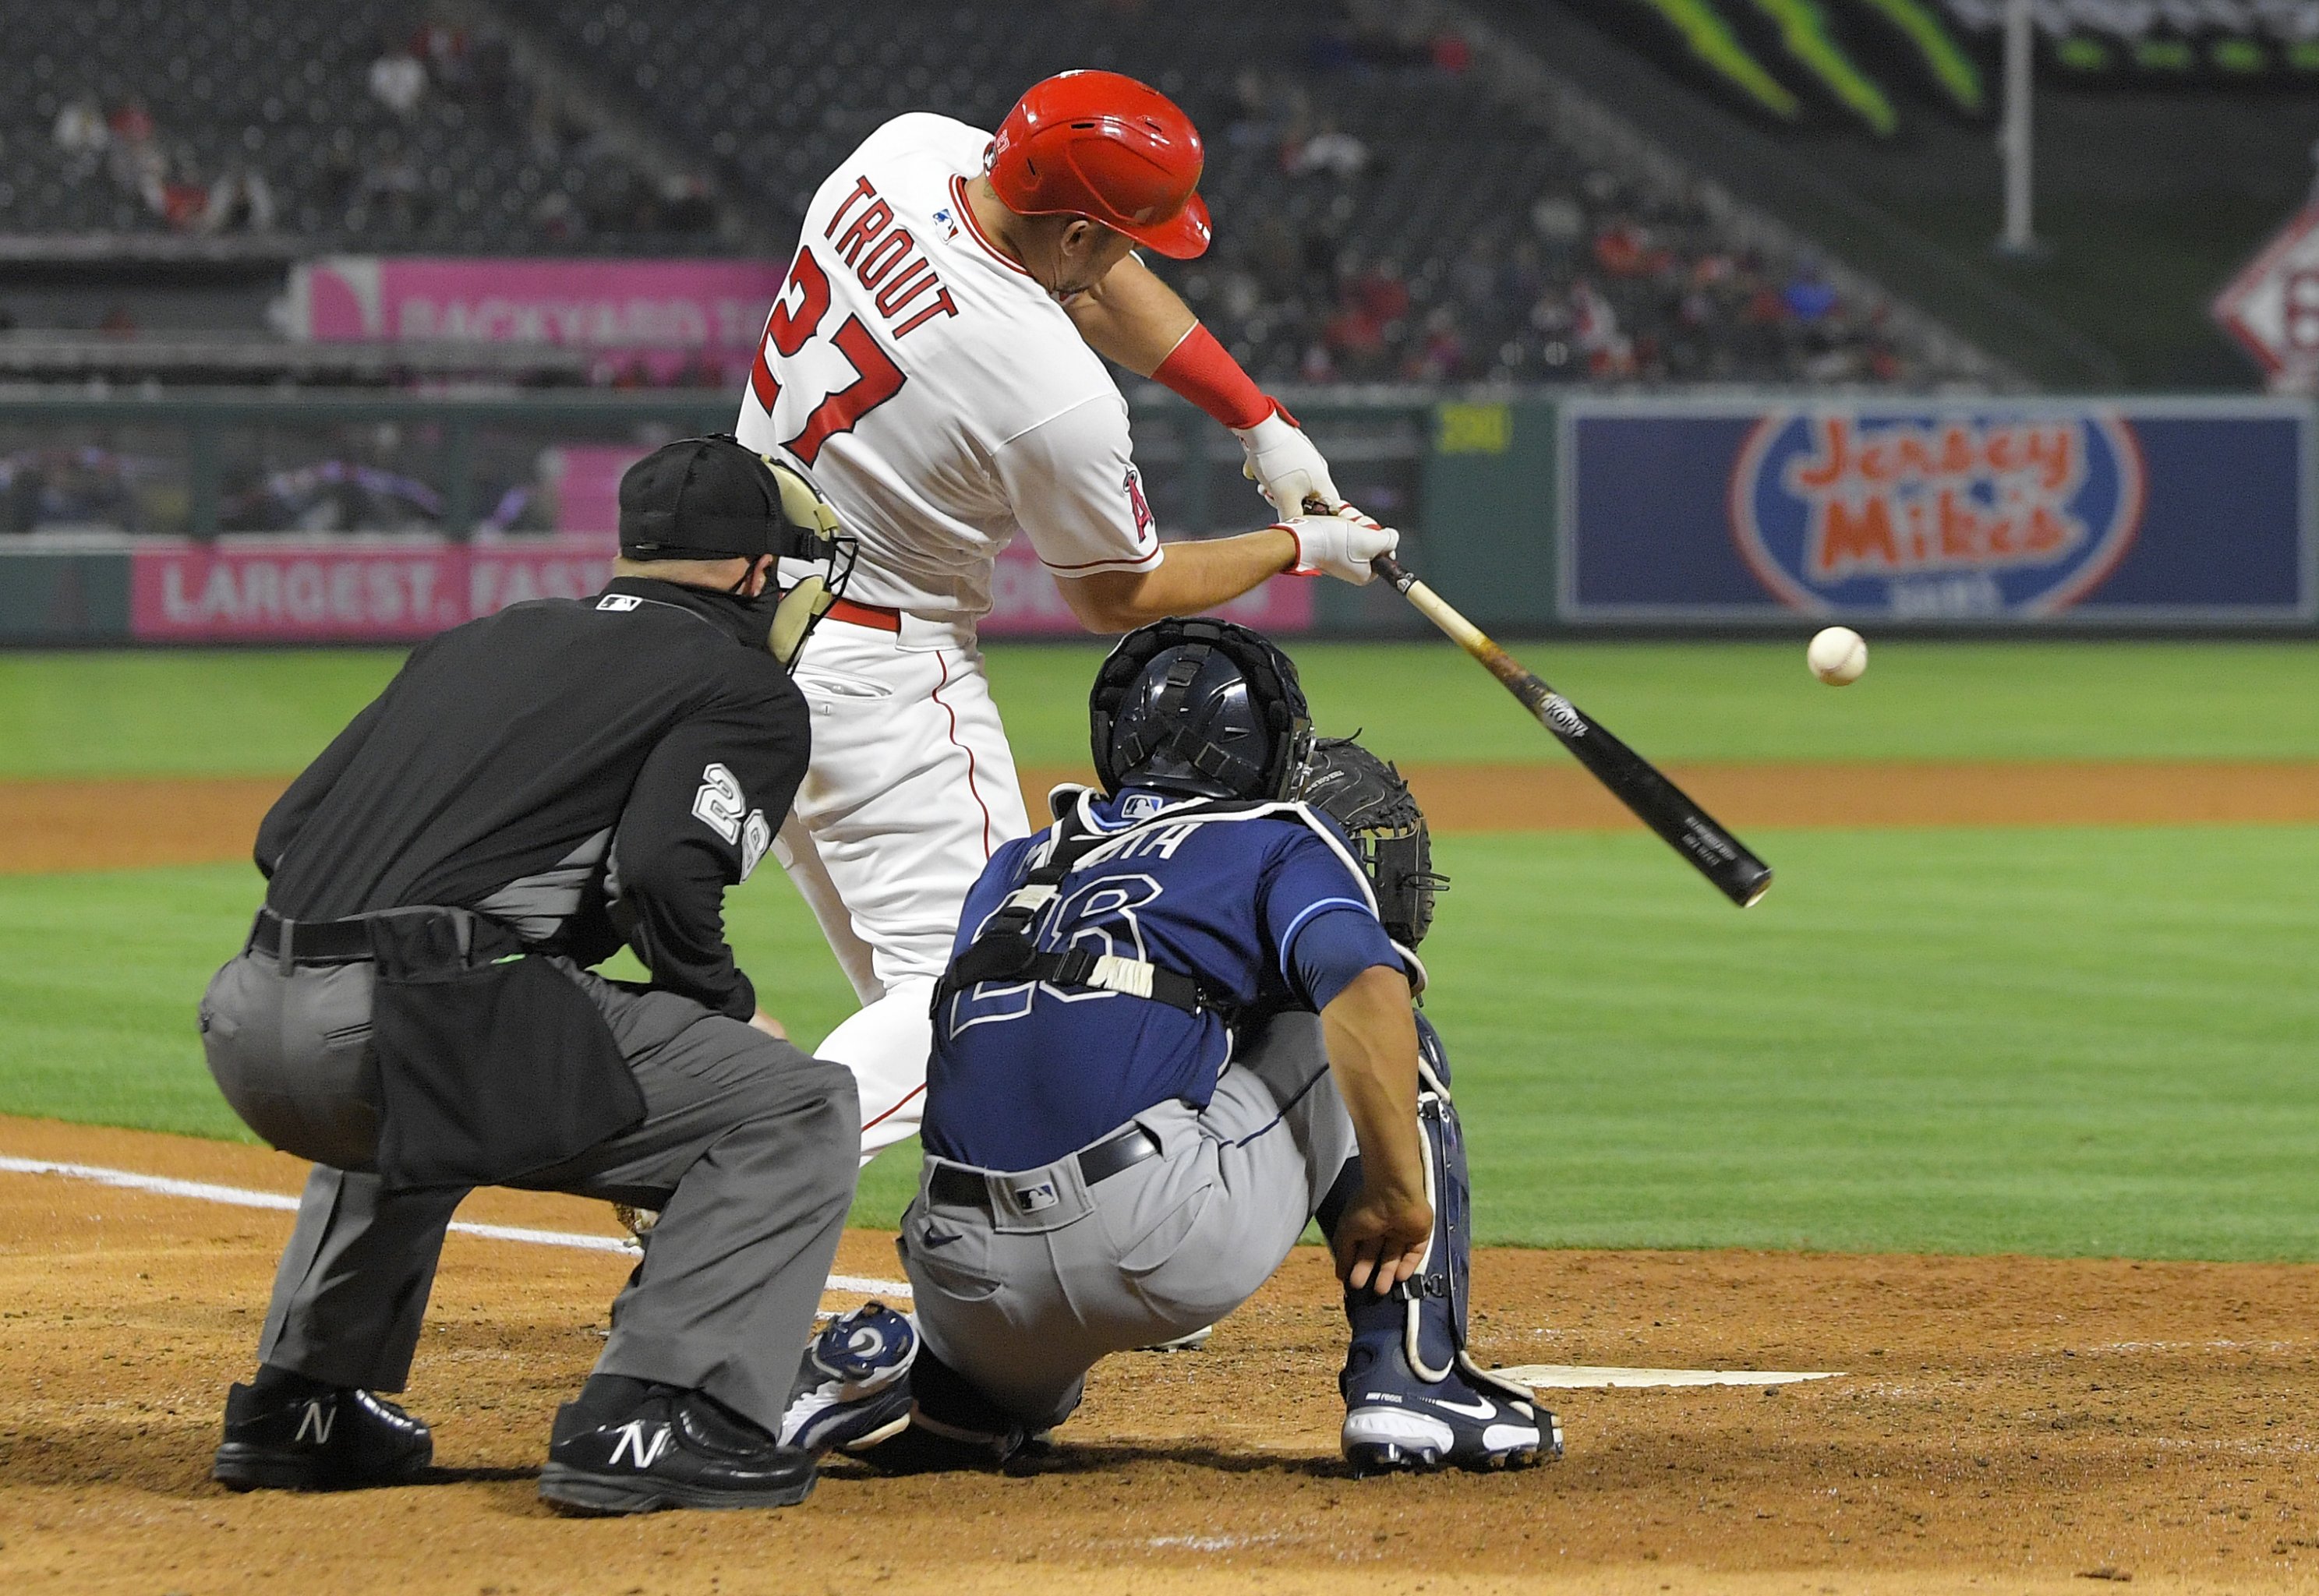 Mike Trout is so good, he already has a higher WAR than most Hall